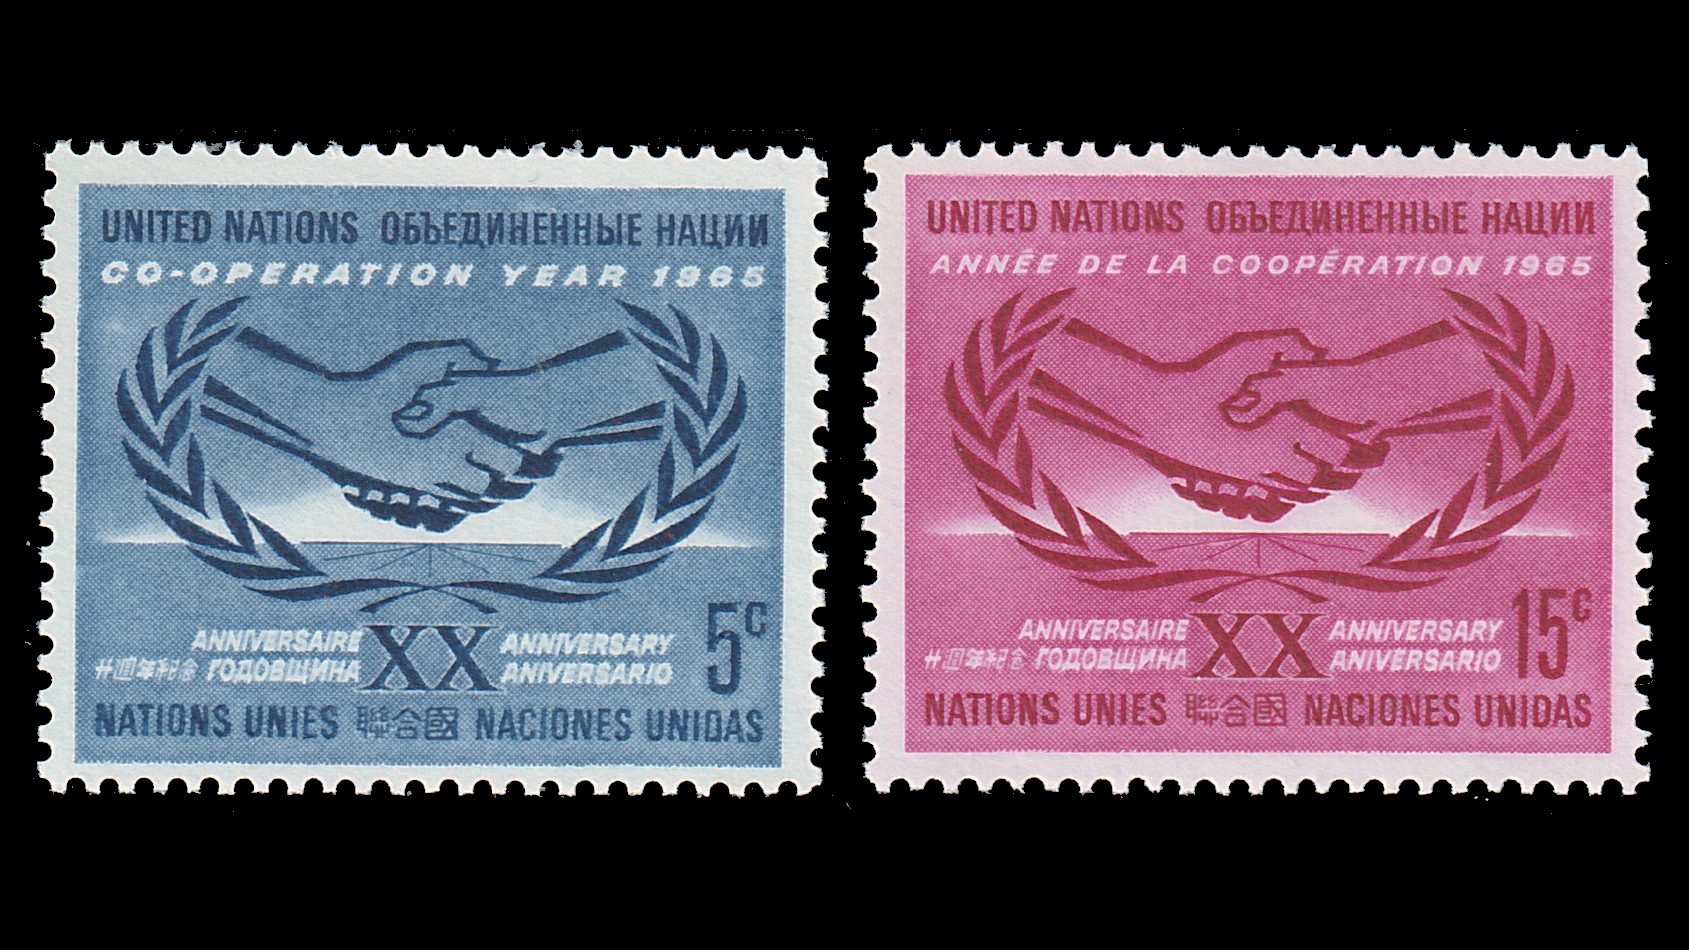 1965 International Cooperation Year United Nations 20th Anniversary